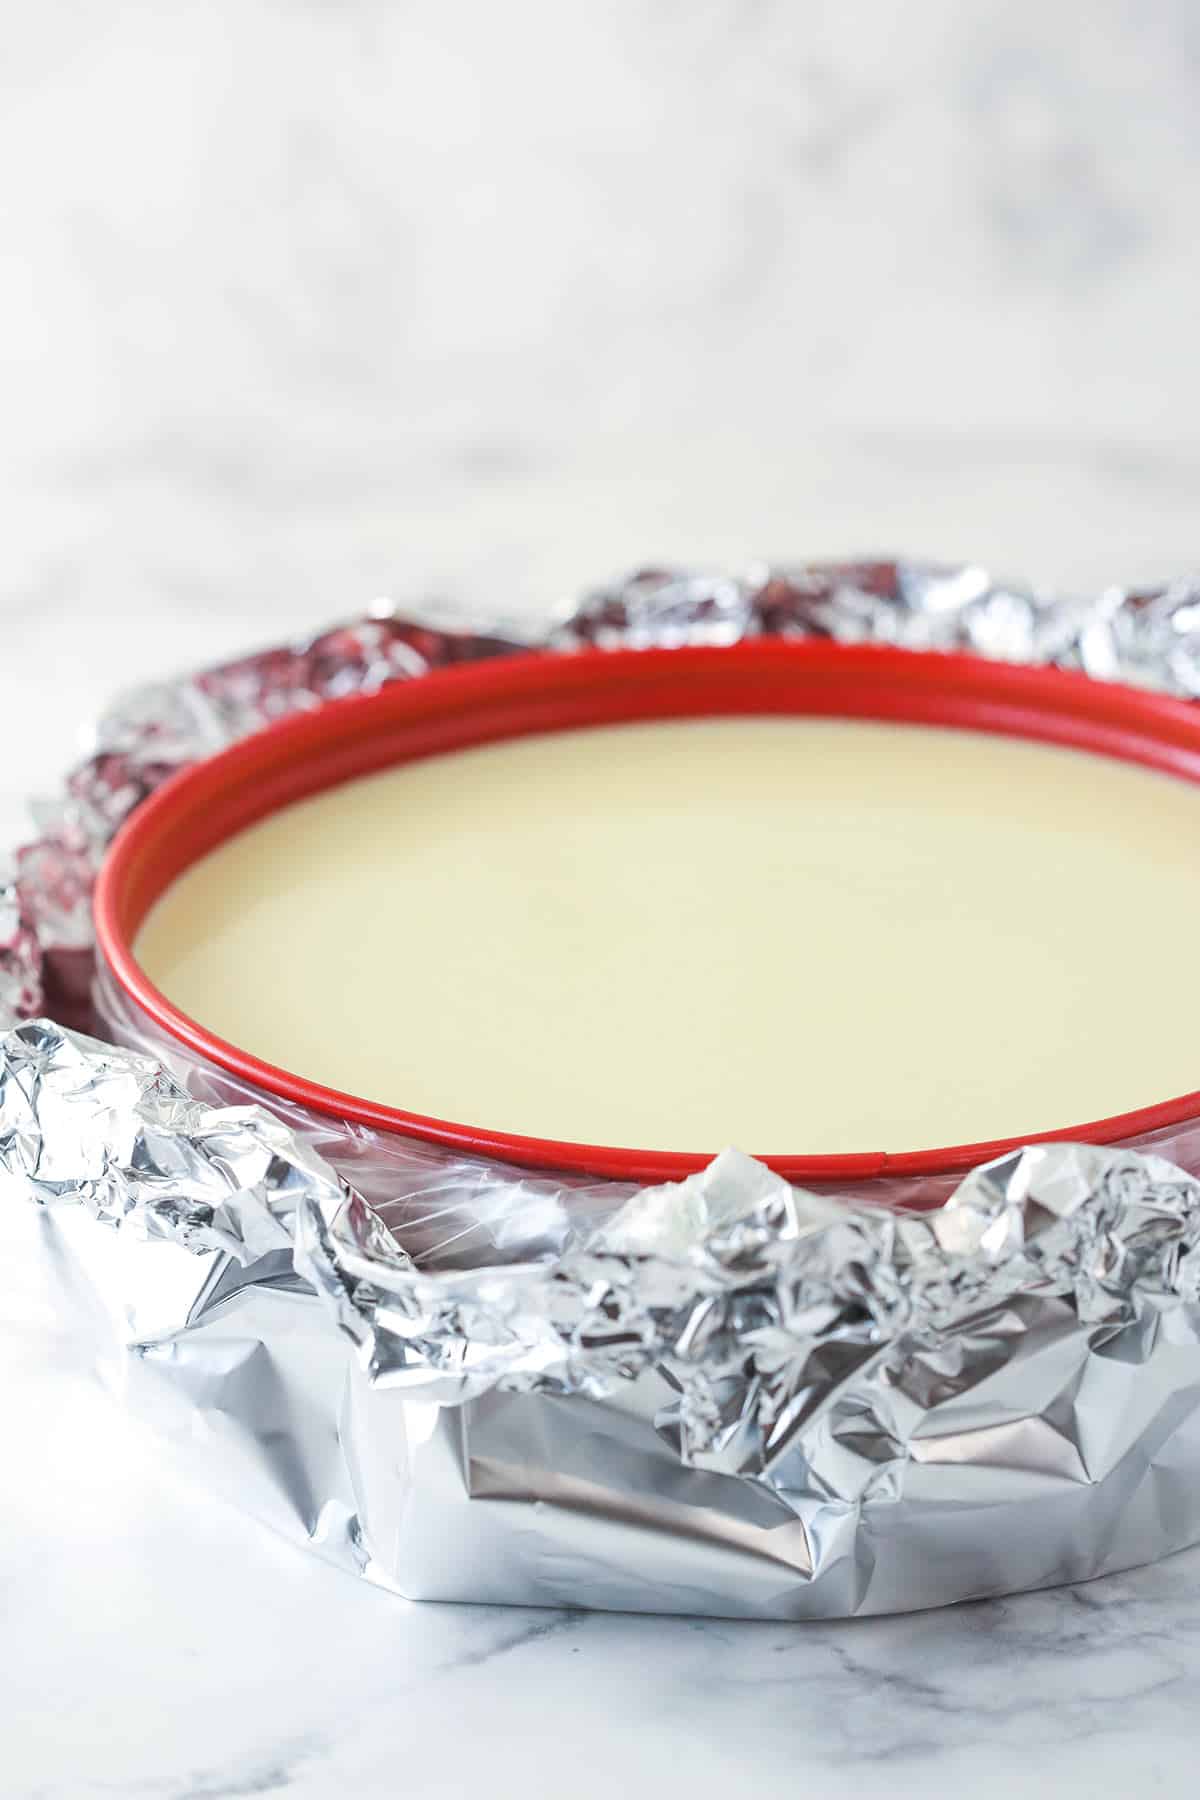 The Best Cheesecake Pan of 2023